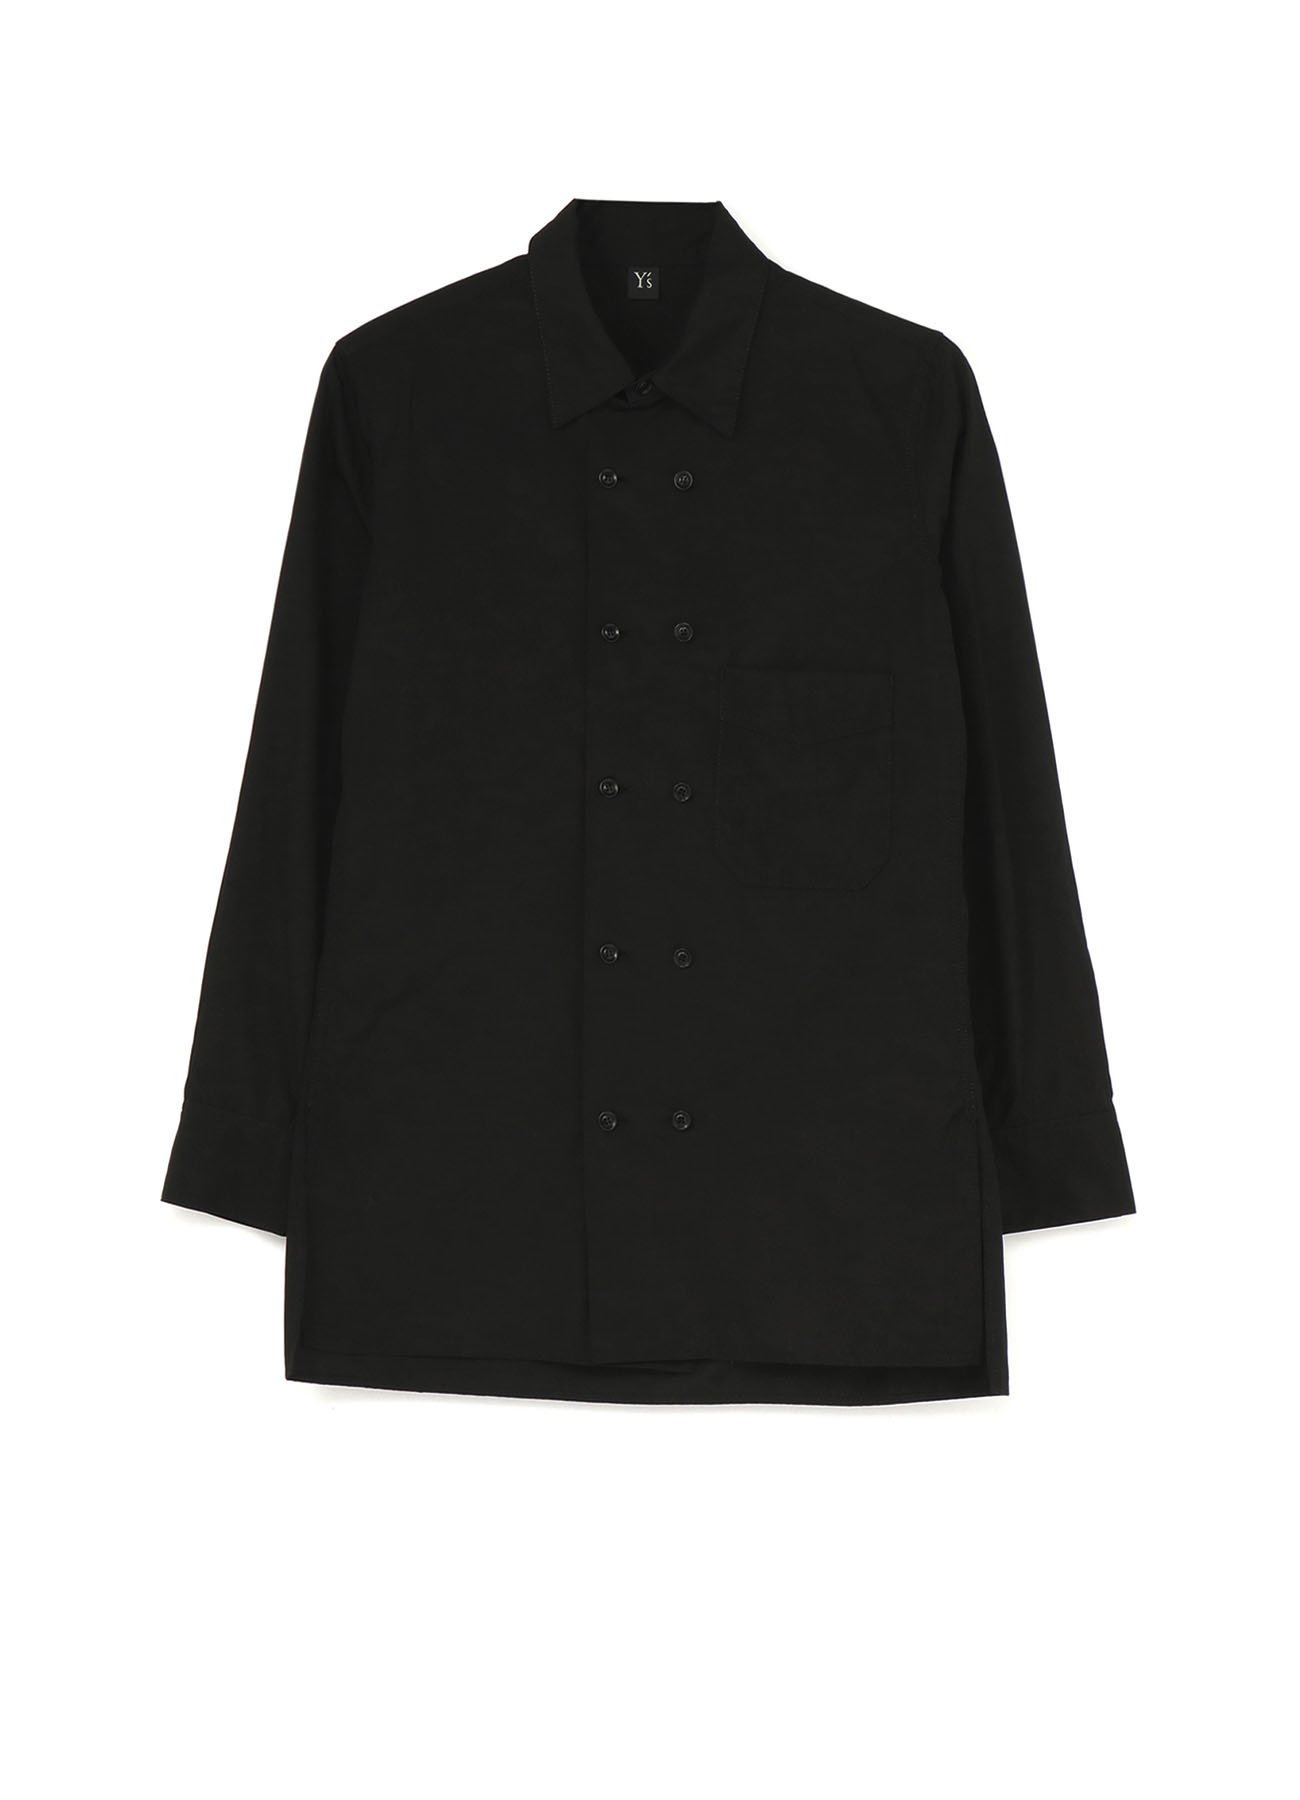 BROAD FRONT DOUBLE SHIRT